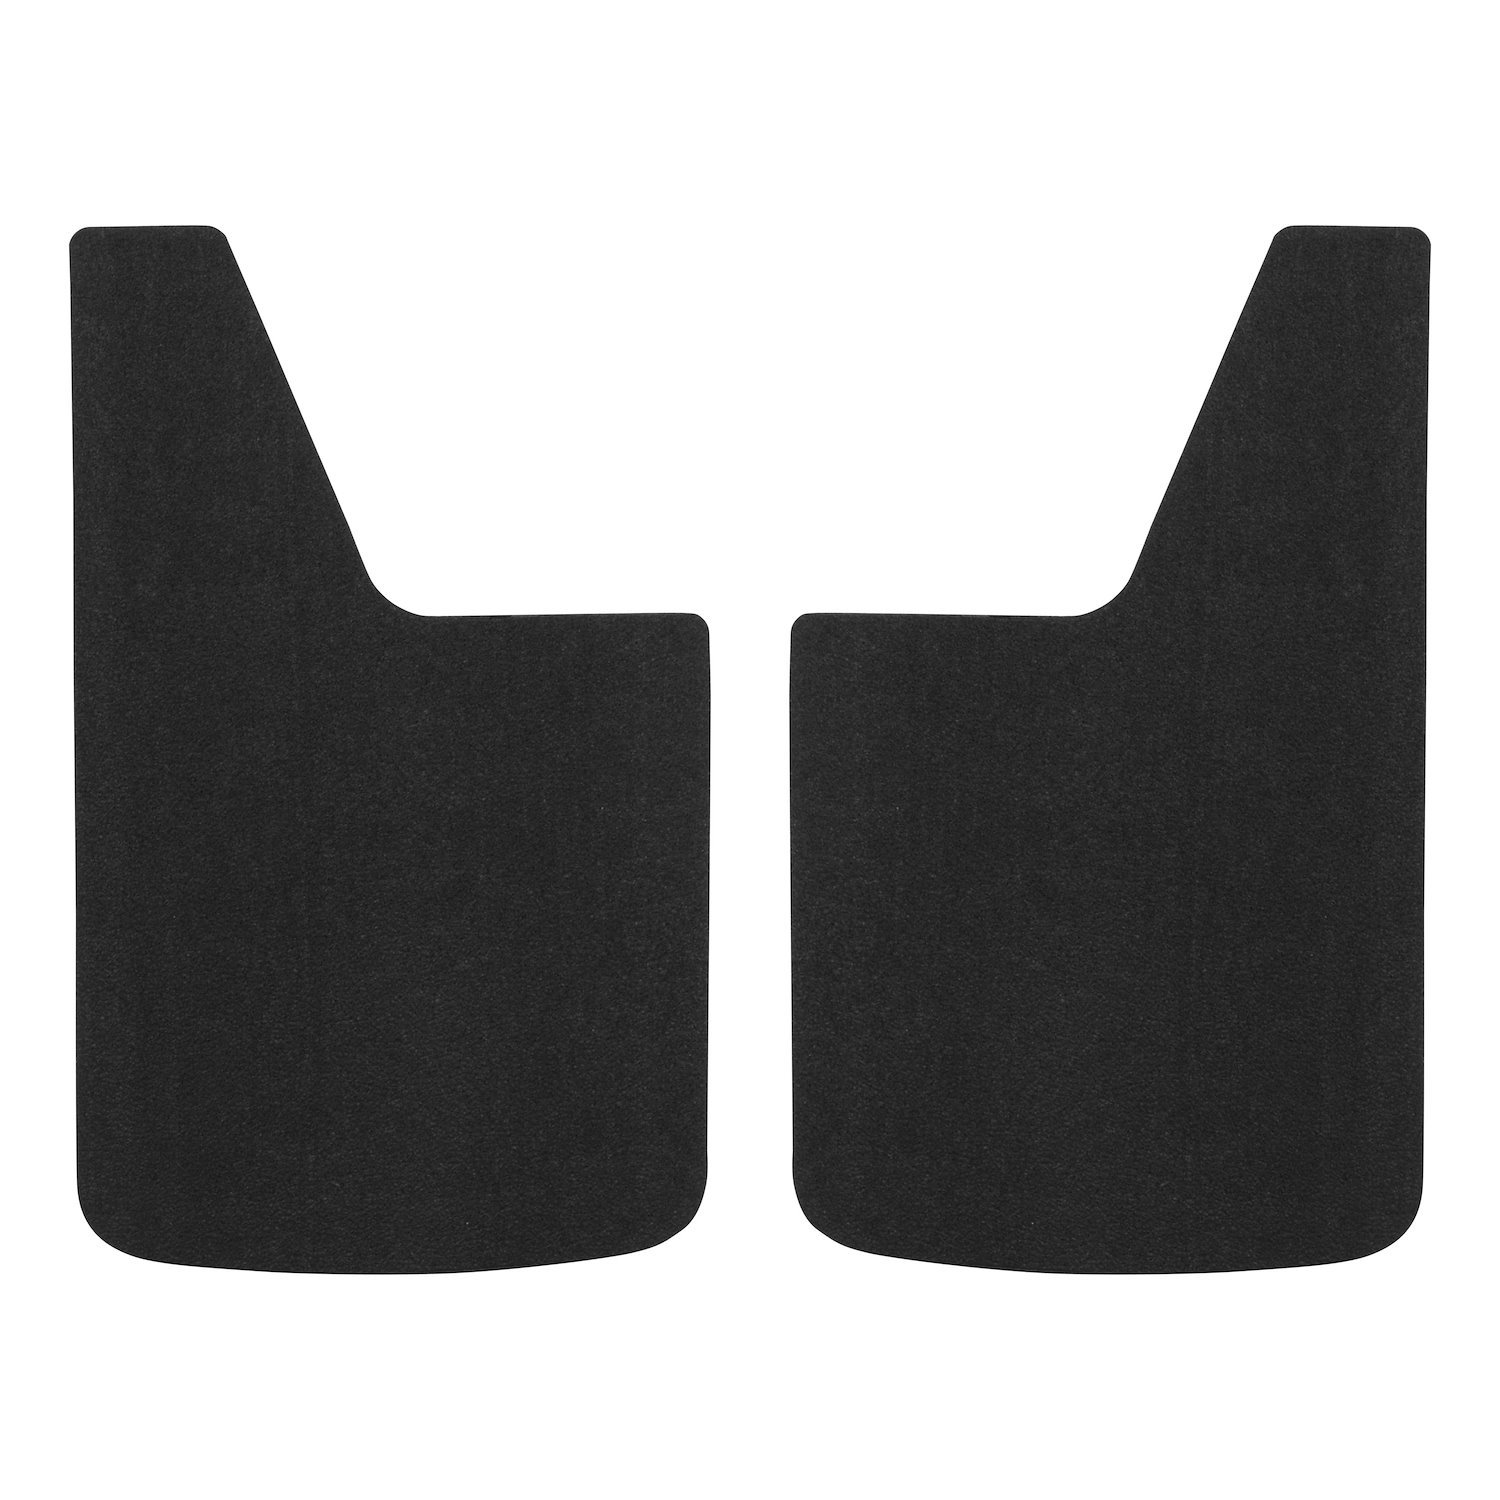 251020 Universal Front or Rear 12 in. x 20 in. Textured Rubber Mud Guards